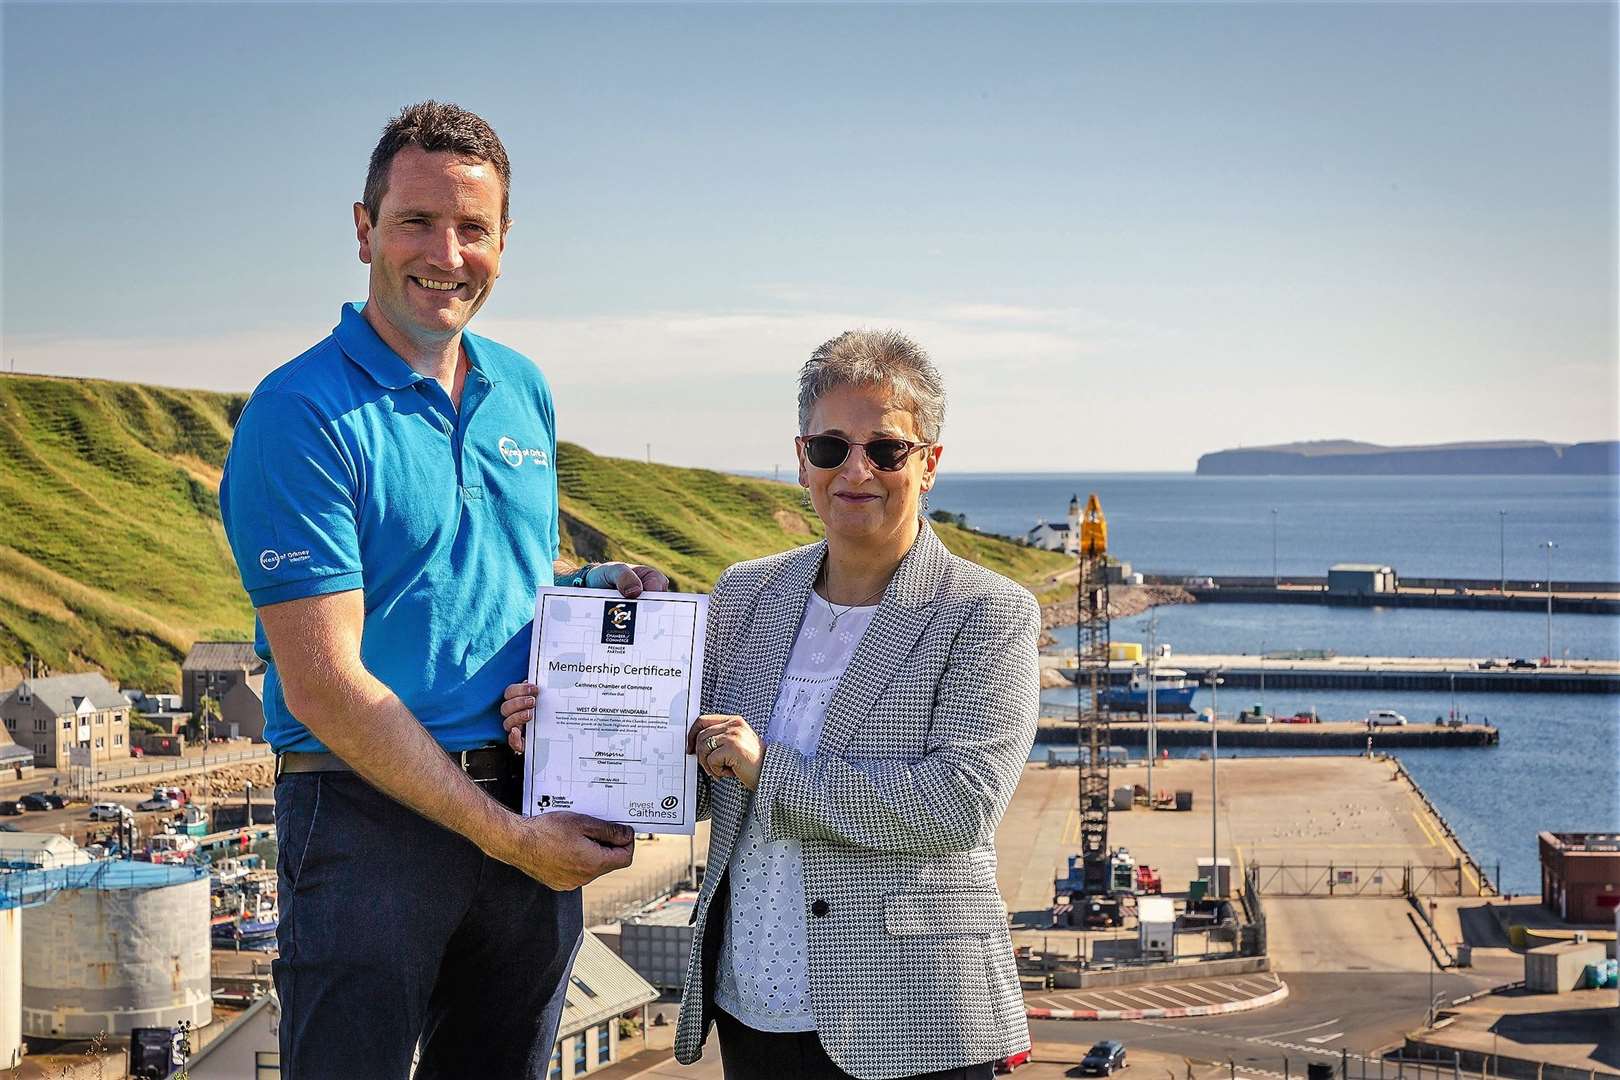 Project development manager Jack Farnham with Trudy Morris from Caithness Chamber of Commerce at Scrabster Harbour.